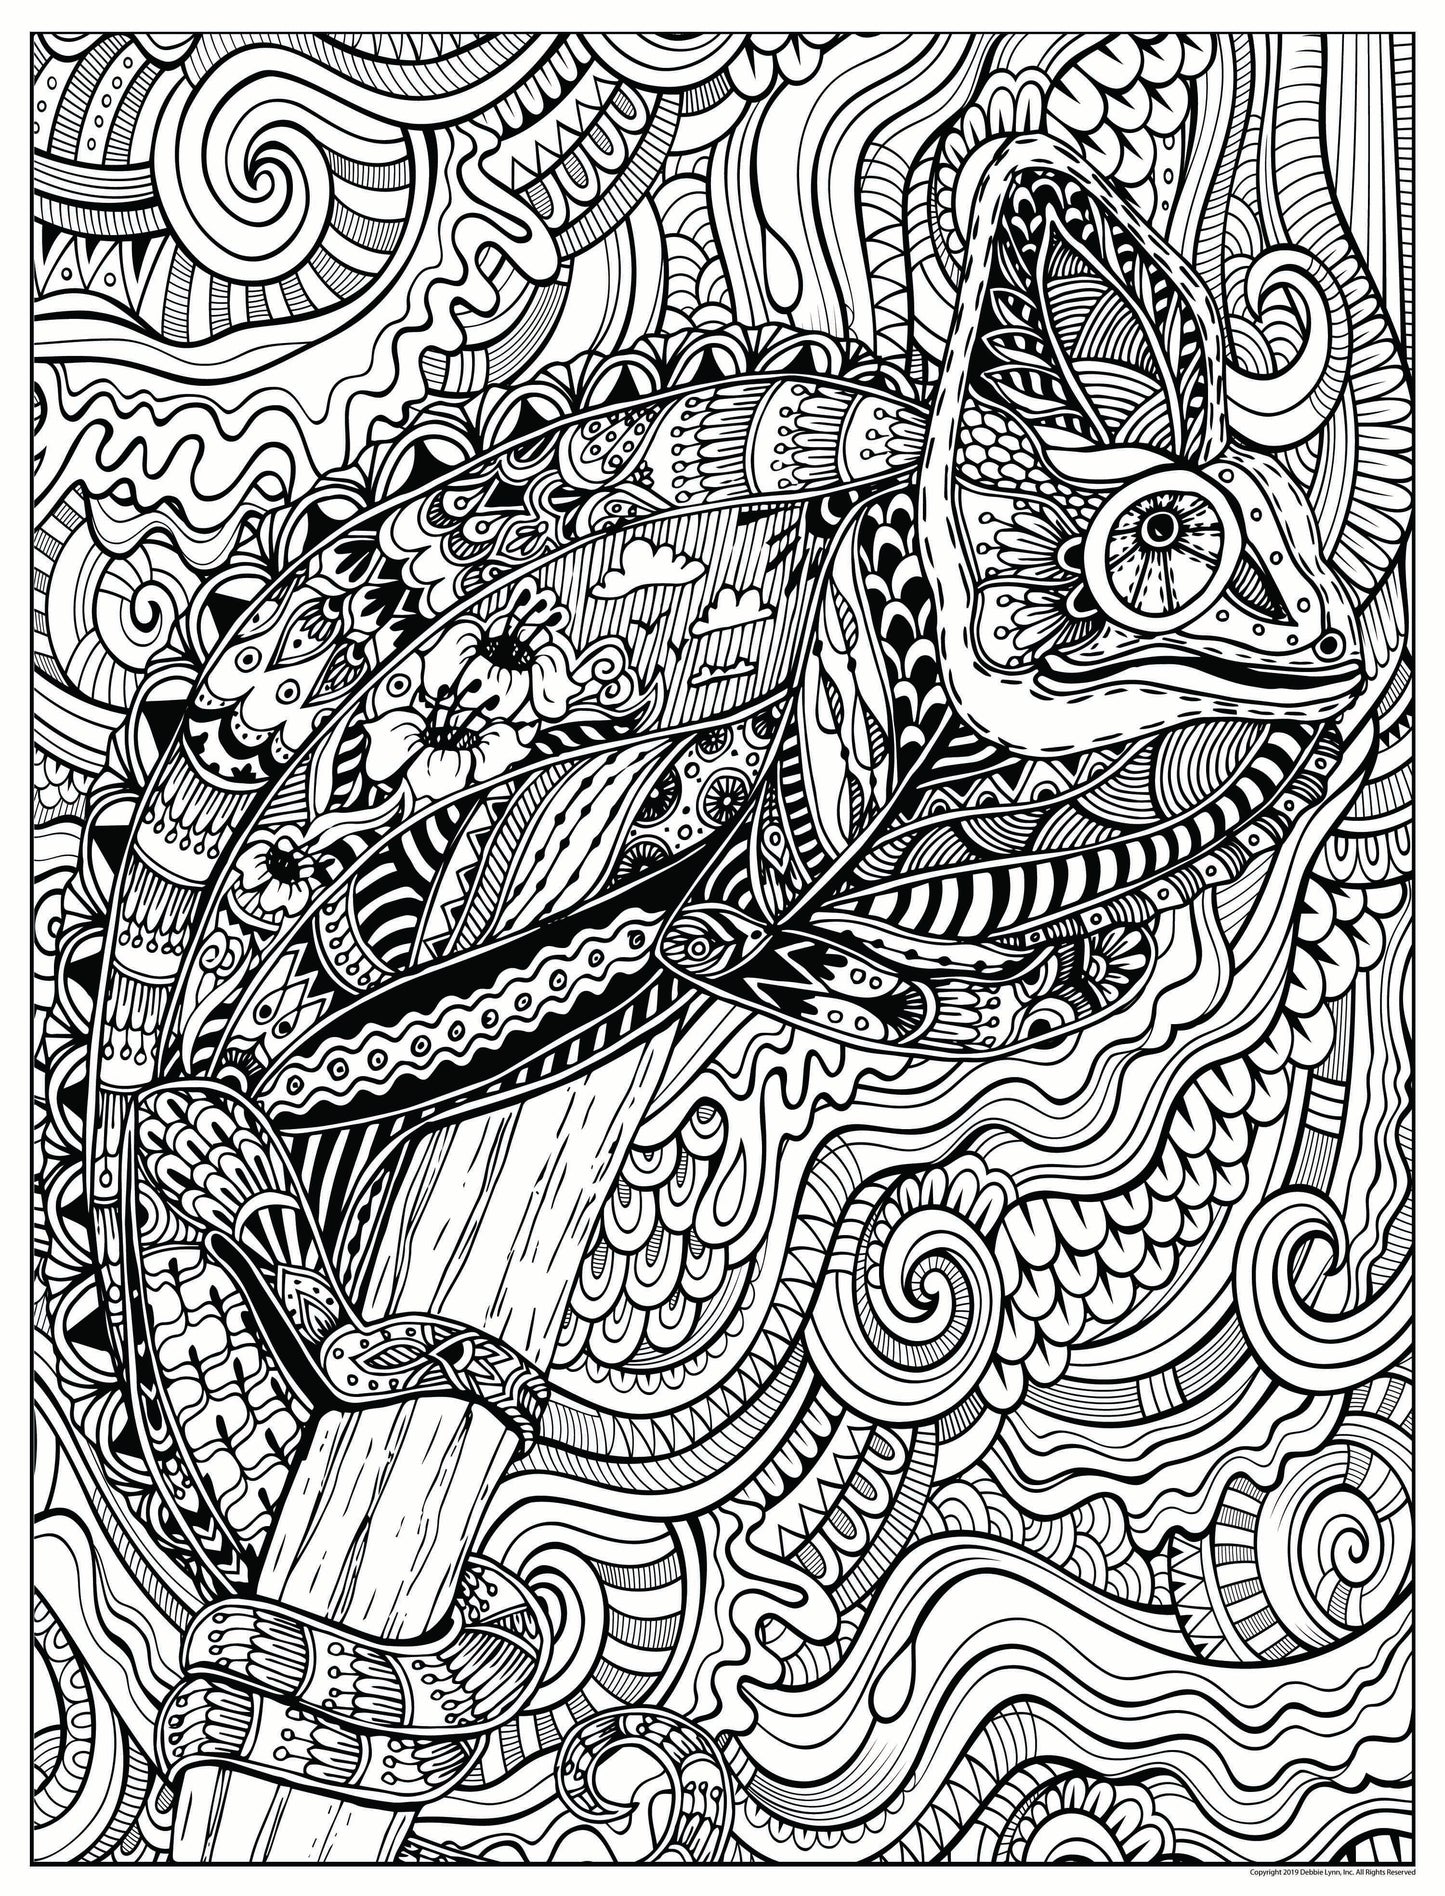 Chameleon Personalized Giant Coloring Poster 46"x60"